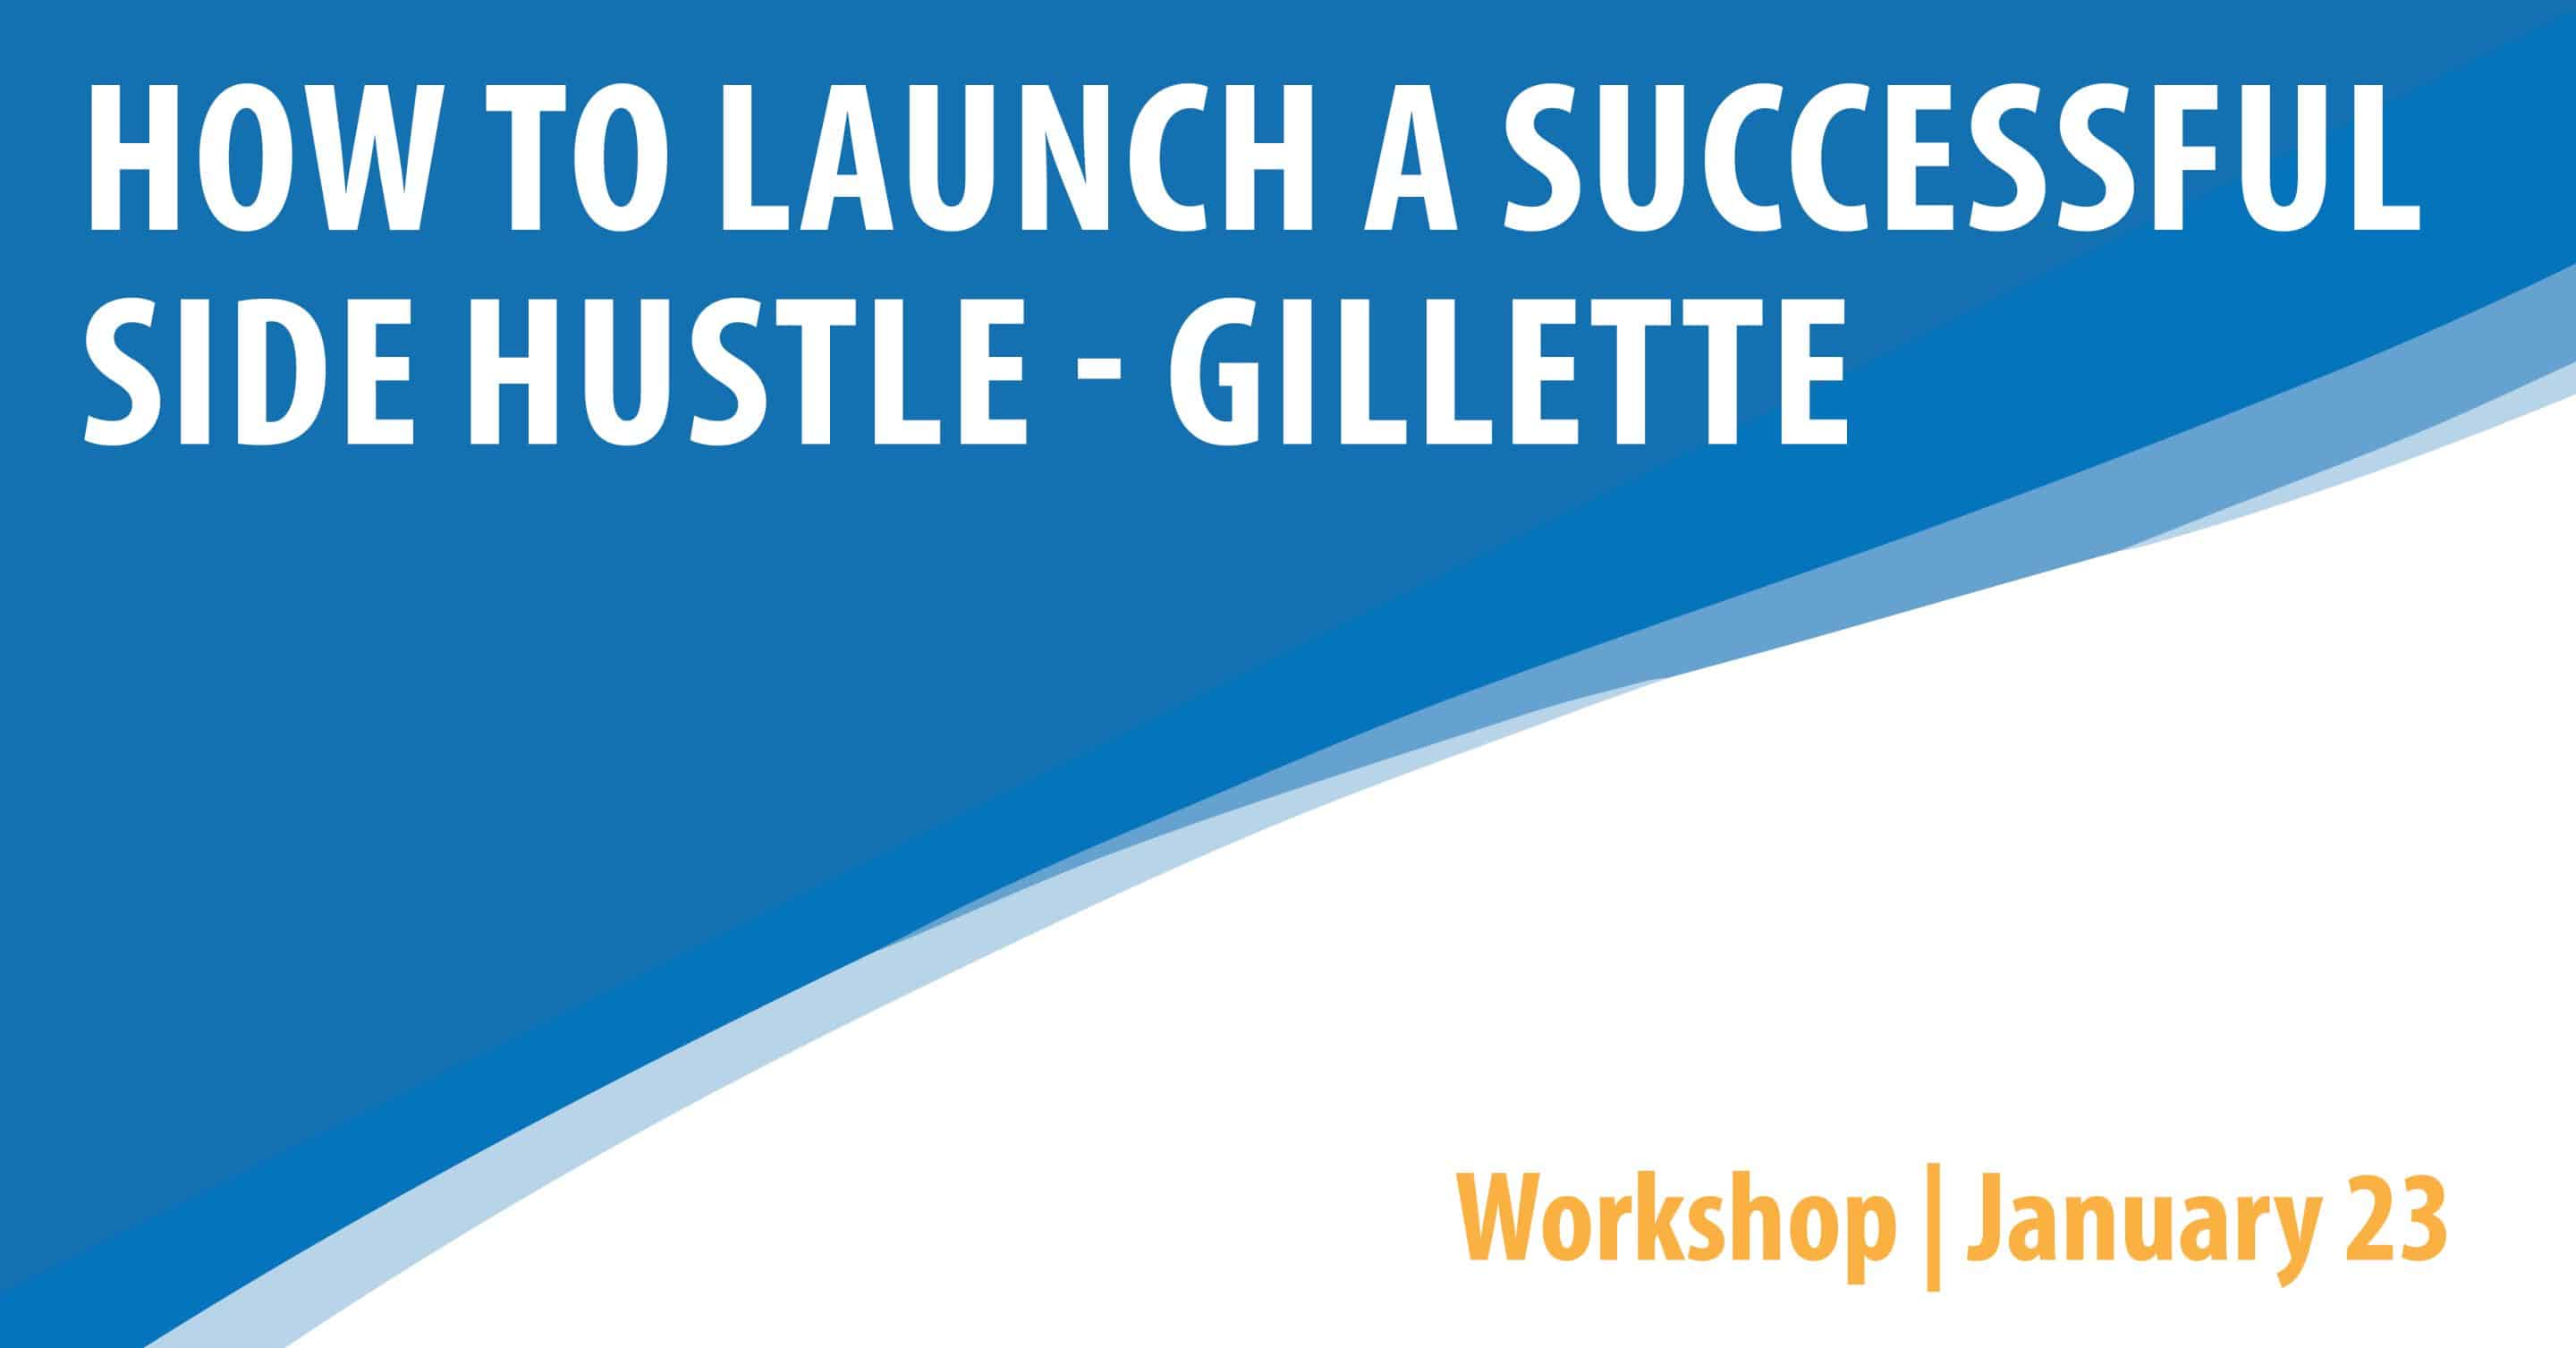 How to Launch a Successful Side Hustle - Gillette